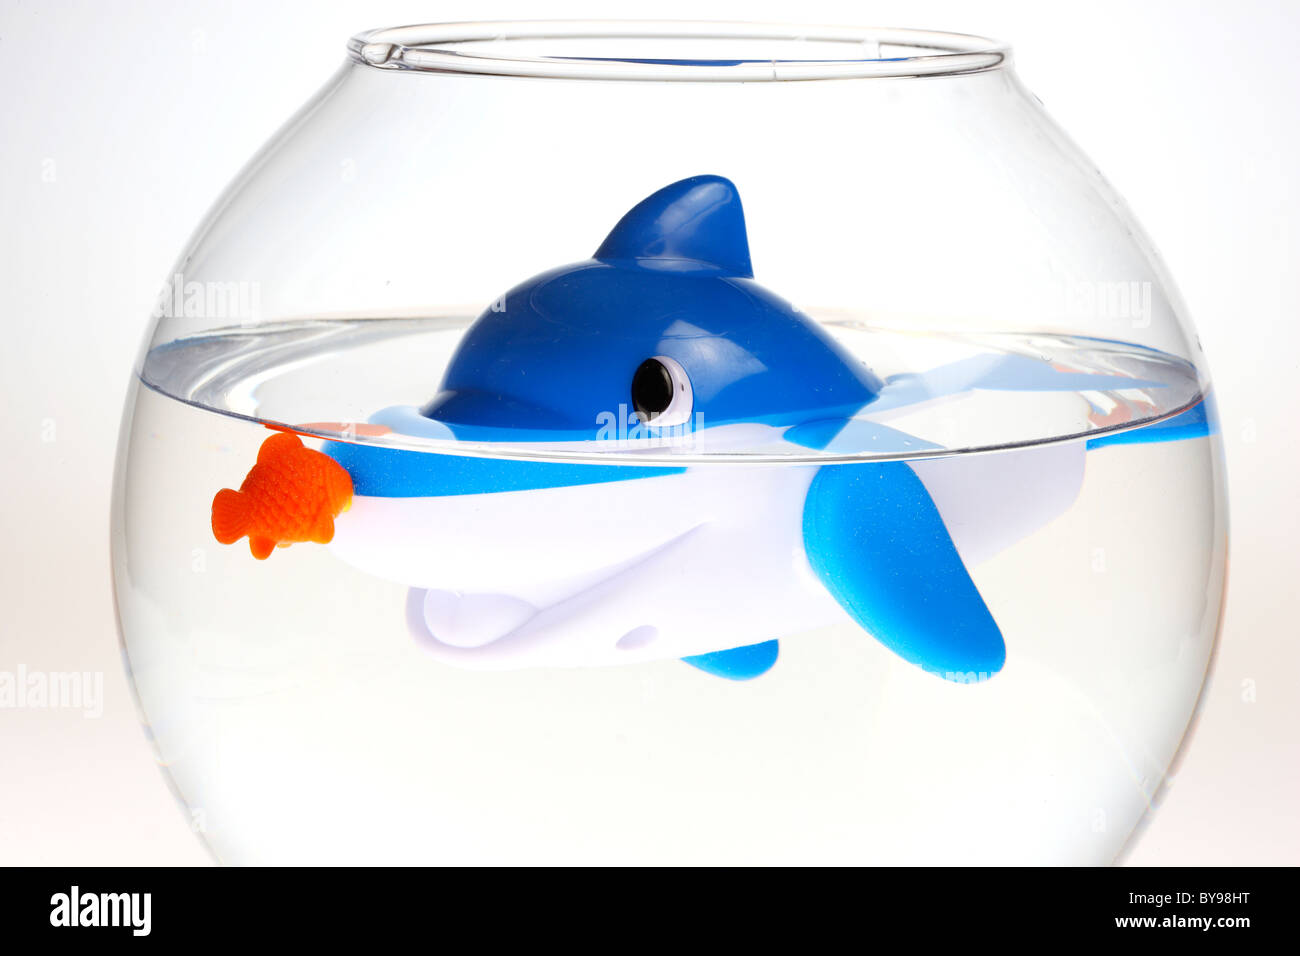 https://c8.alamy.com/comp/BY98HT/dolphin-plastic-wind-up-toy-in-a-fish-bowl-BY98HT.jpg